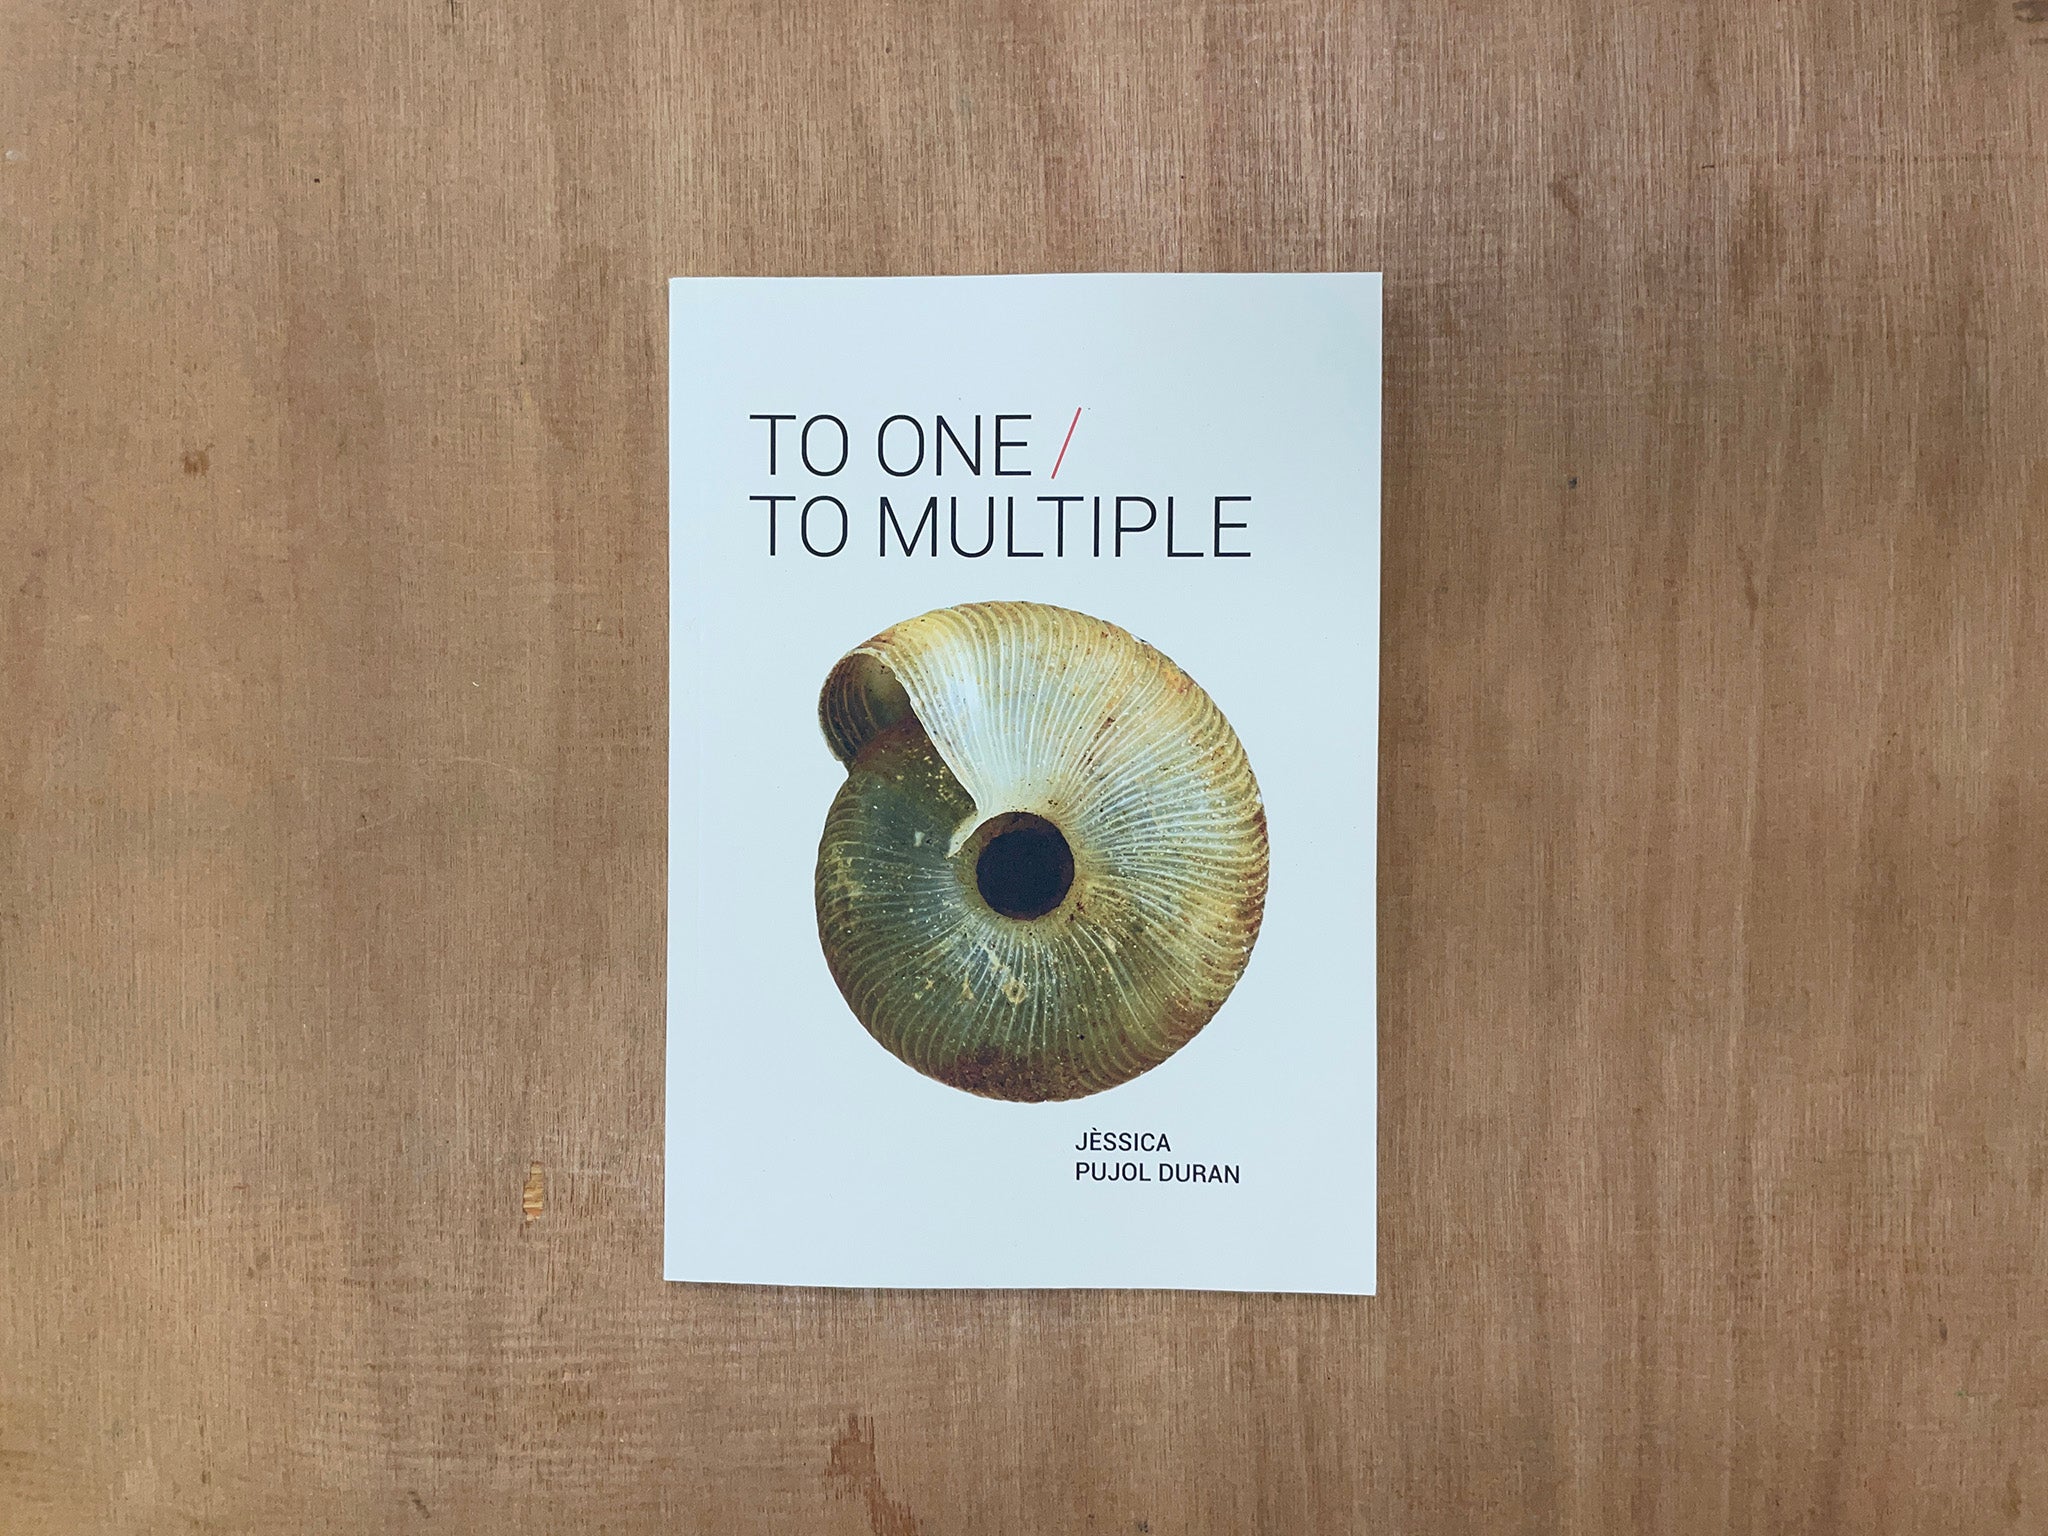 TO ONE / TO MULTIPLE by Jéssica Pujol Duran